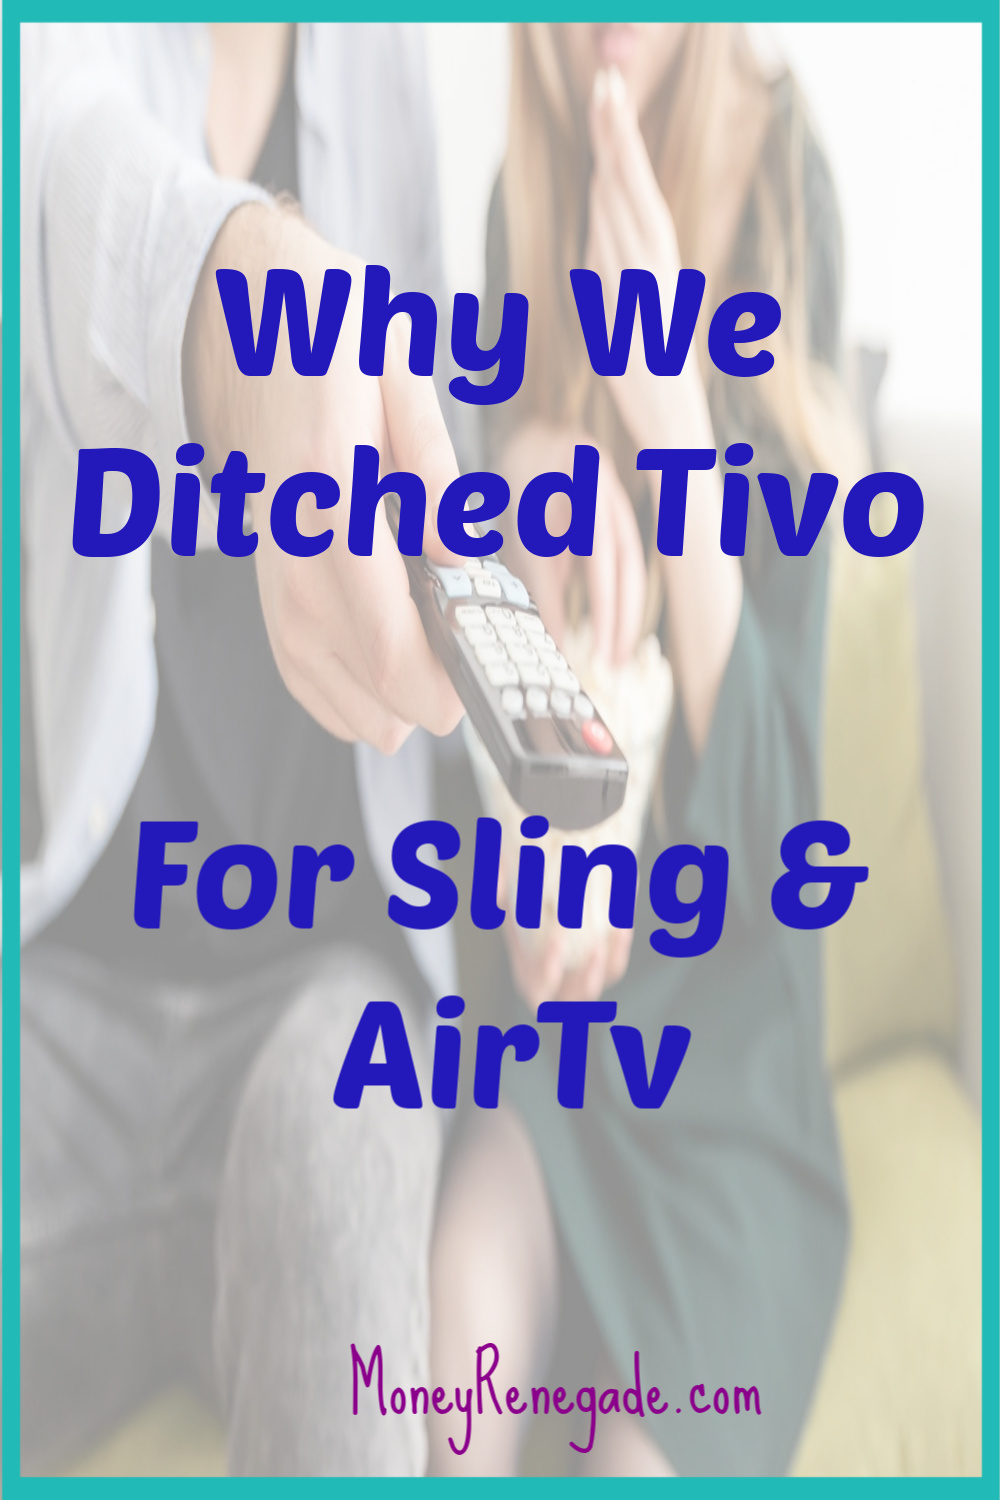 Why We Ditched Tivo for Sling & AirTv